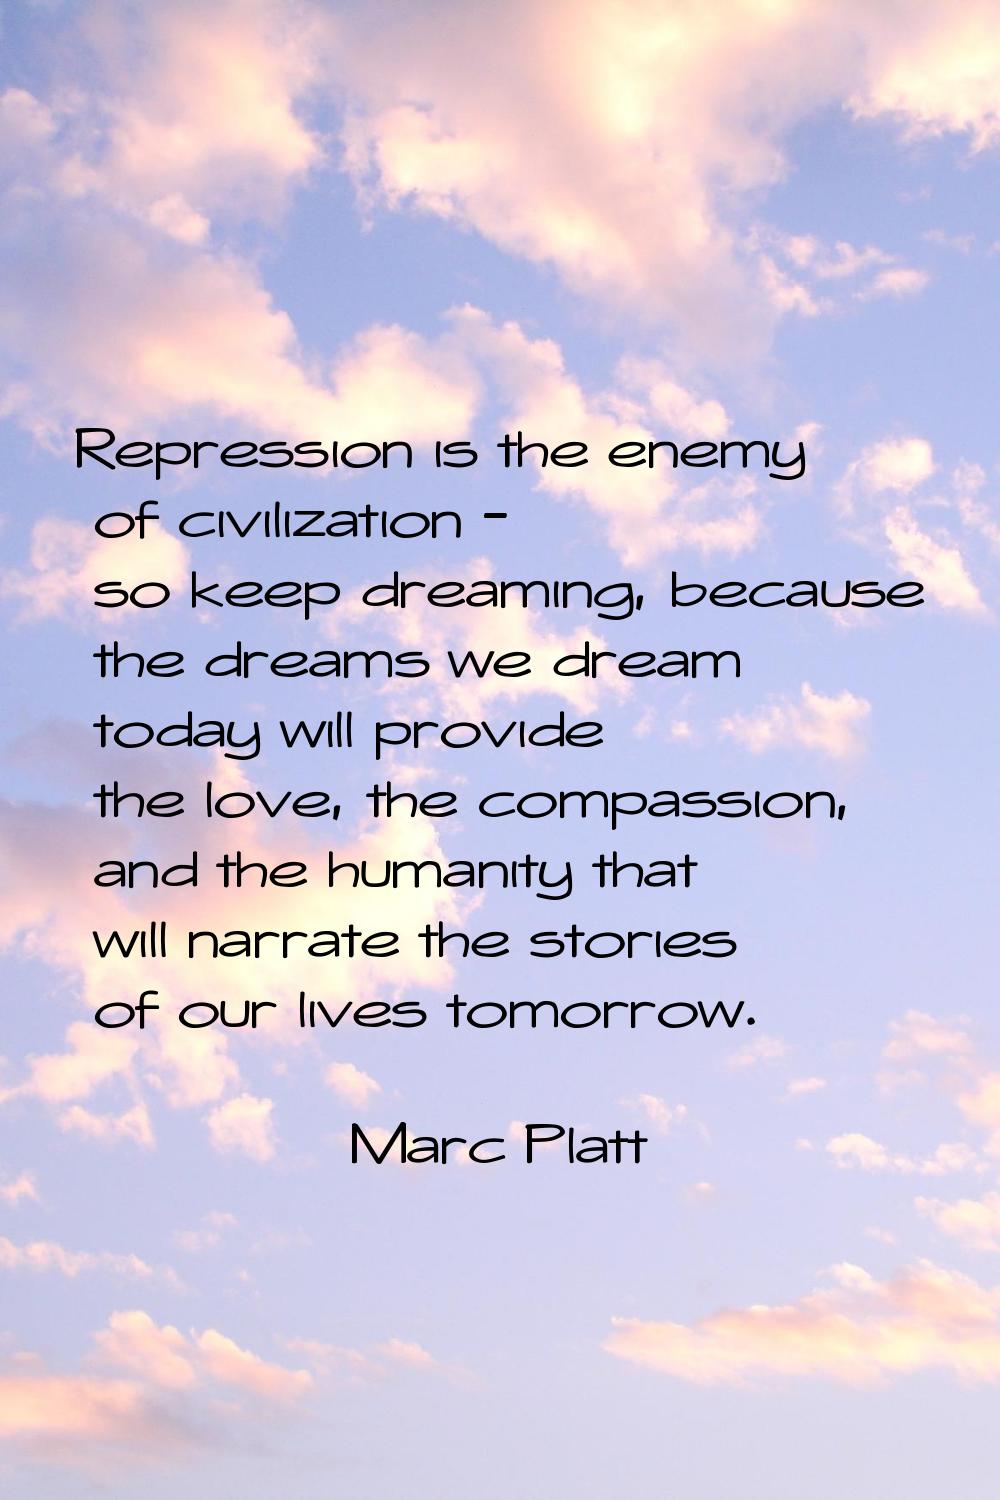 Repression is the enemy of civilization - so keep dreaming, because the dreams we dream today will 